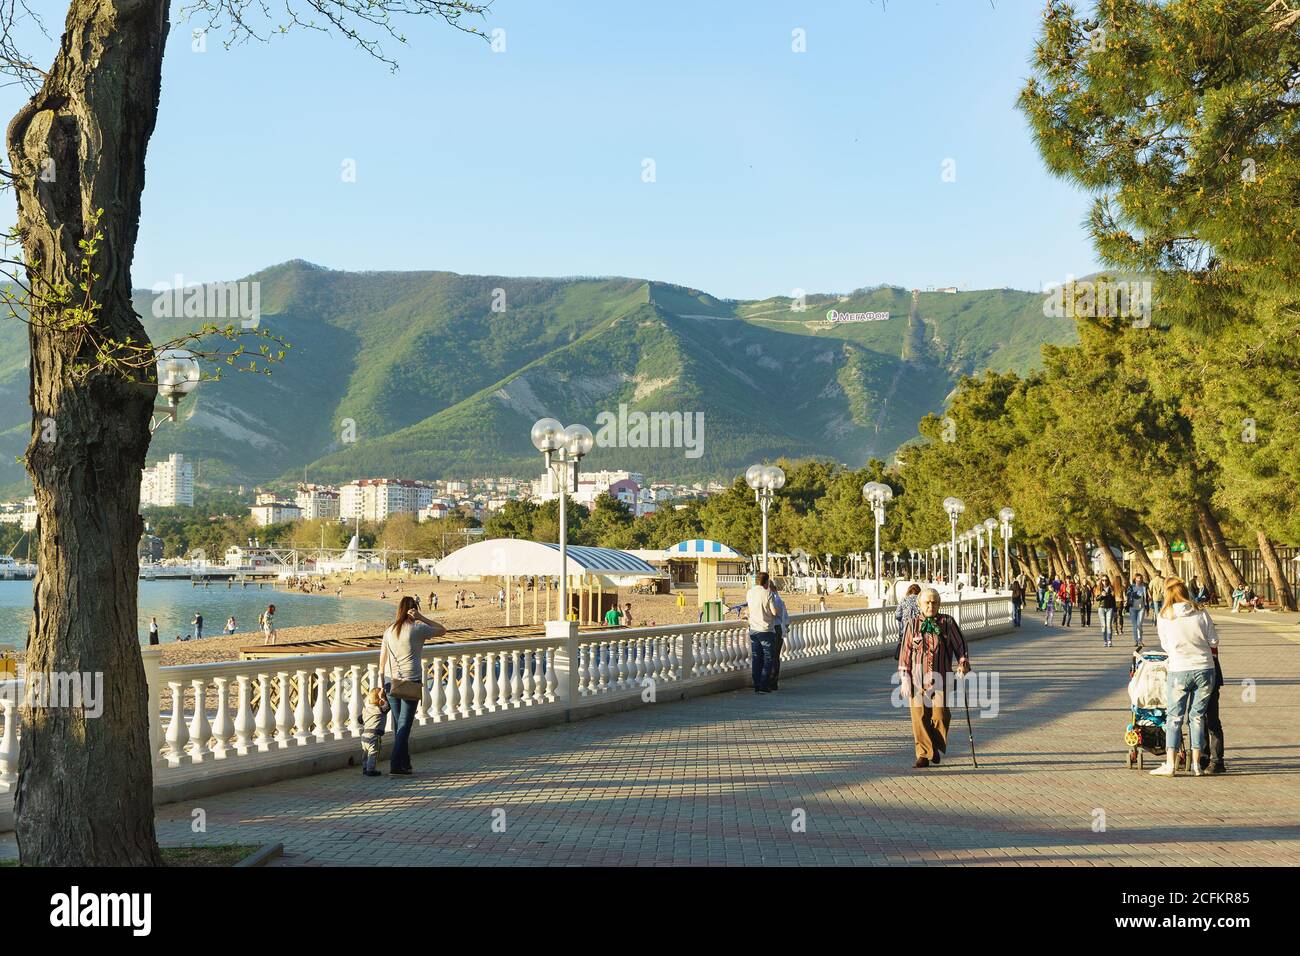 Gelendzhik, Krasnodar Krai, Russia - April 29.2017: People walk along the embankment of Gelendzhik on the background of mountains in the rays of the s Stock Photo